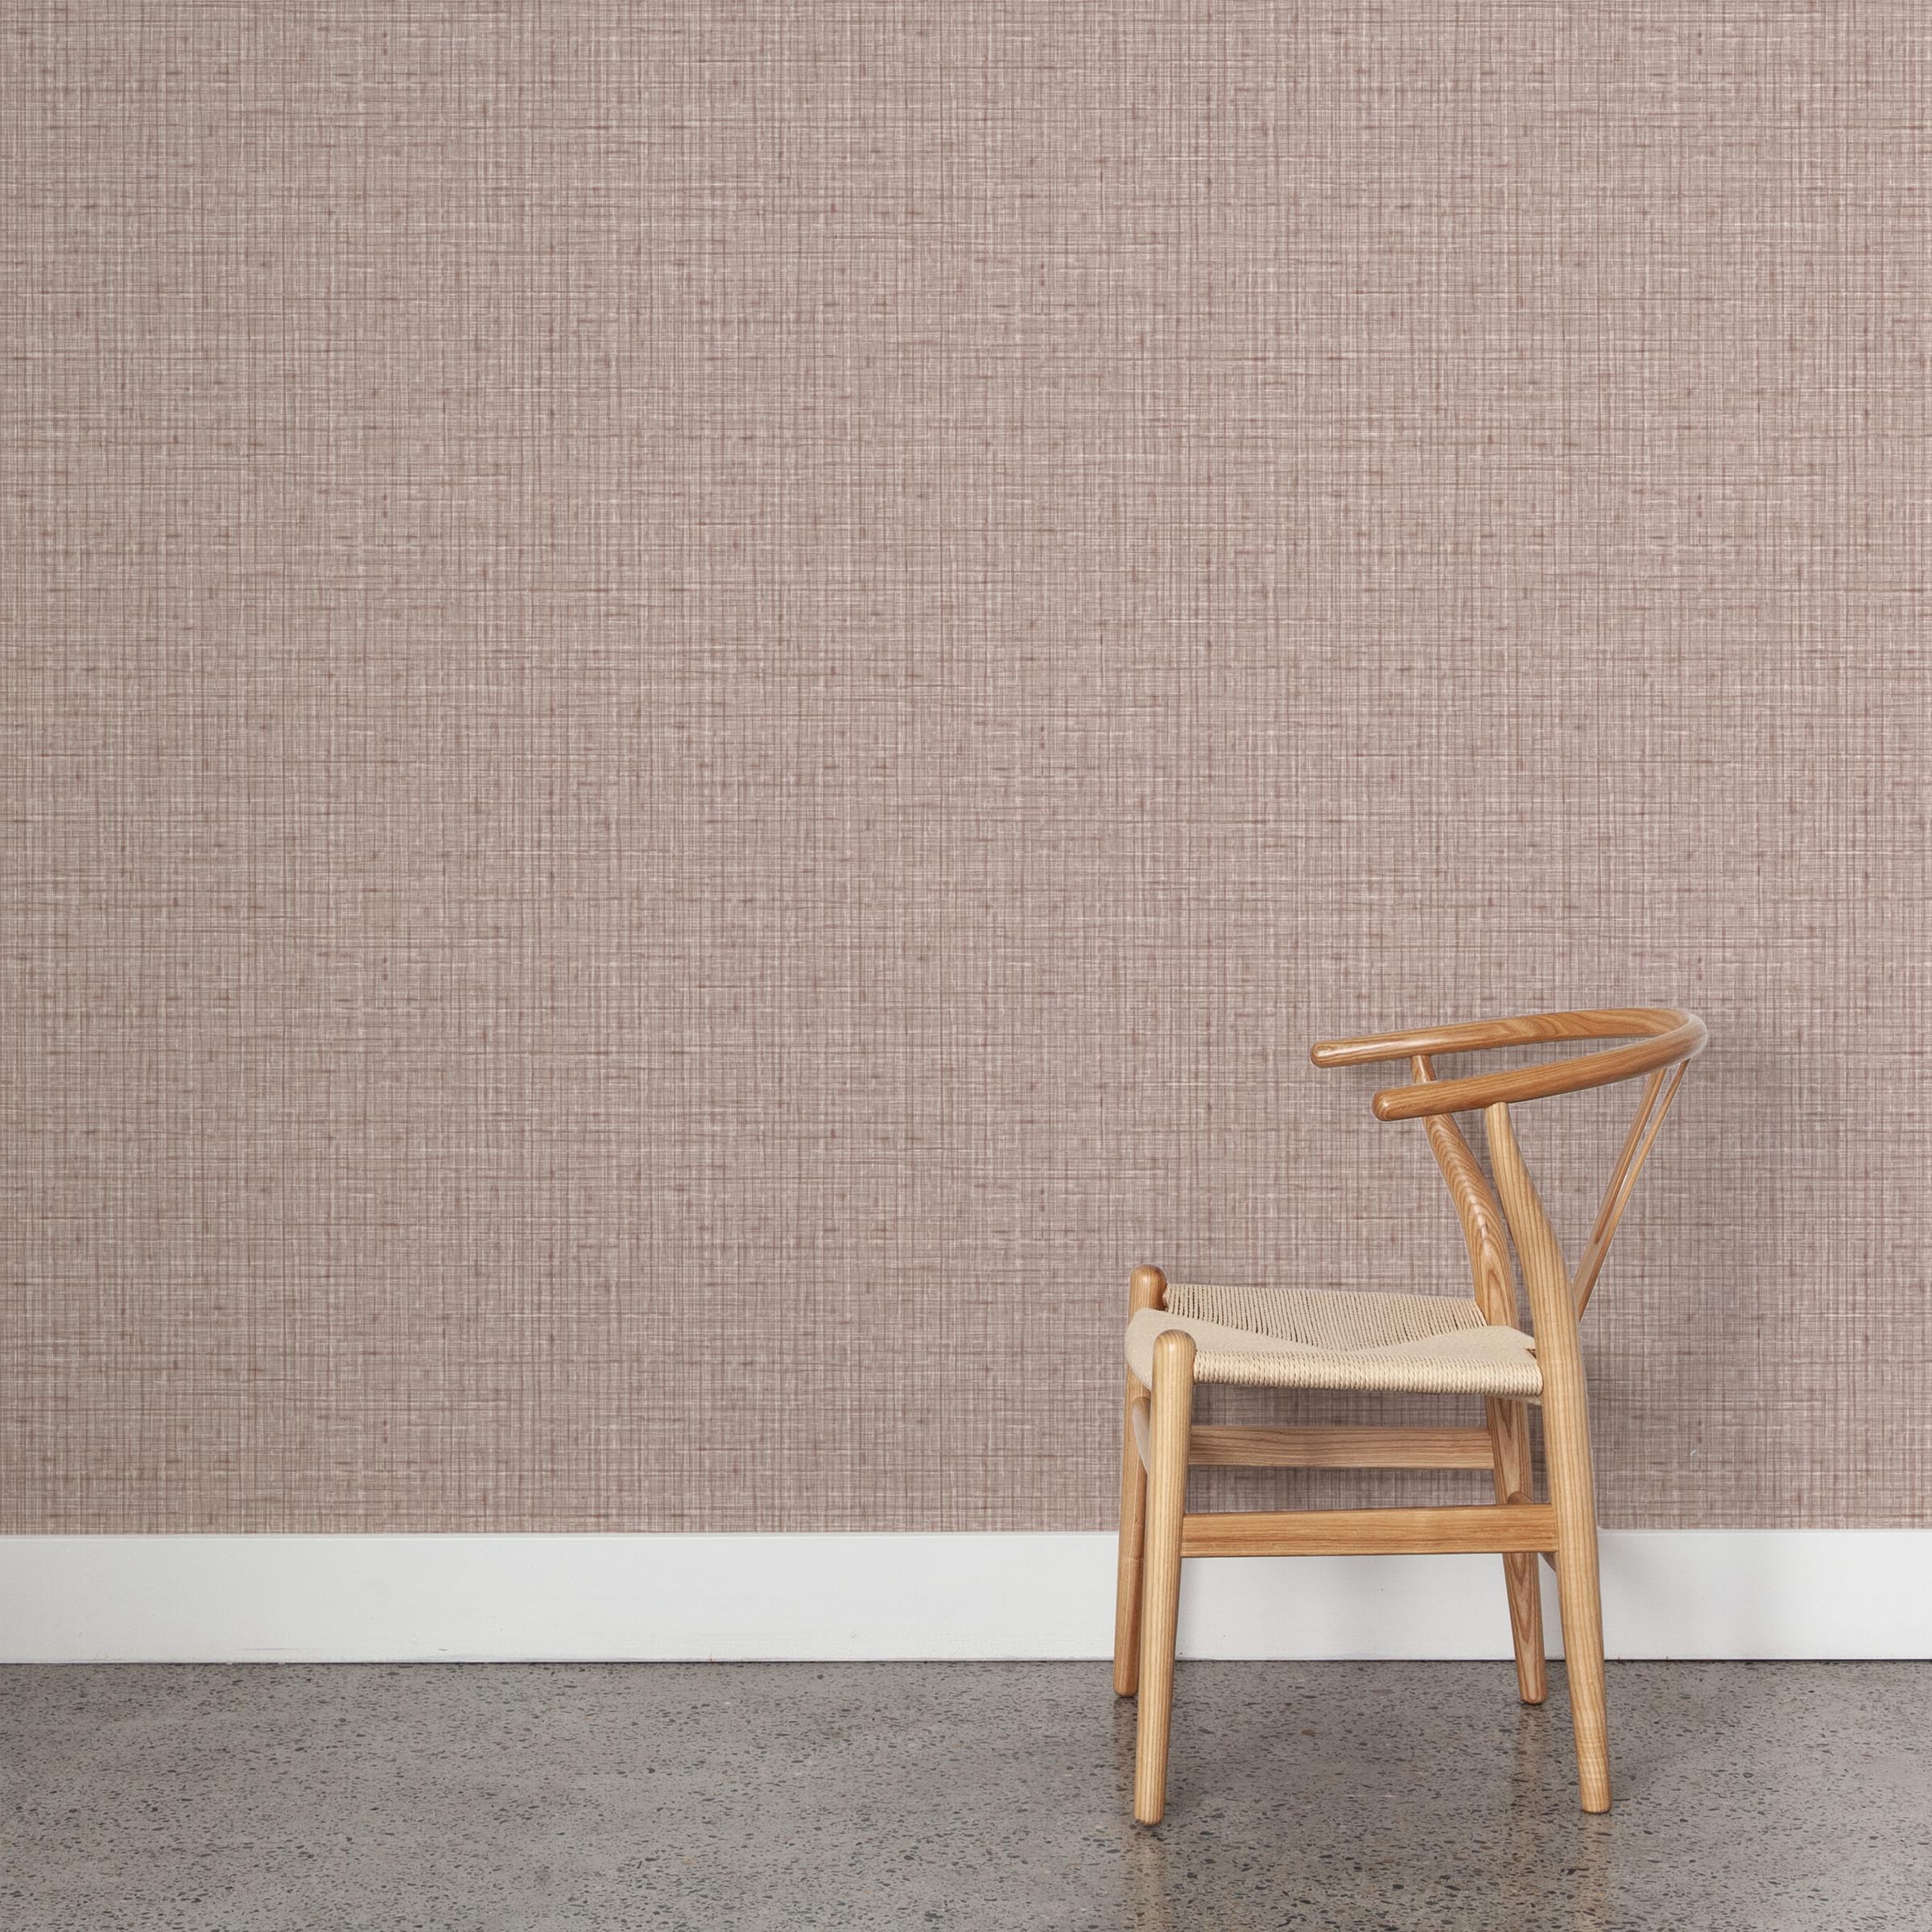 A wooden chair stands in front of a wall papered in a textured tweed pattern in shades of purple.